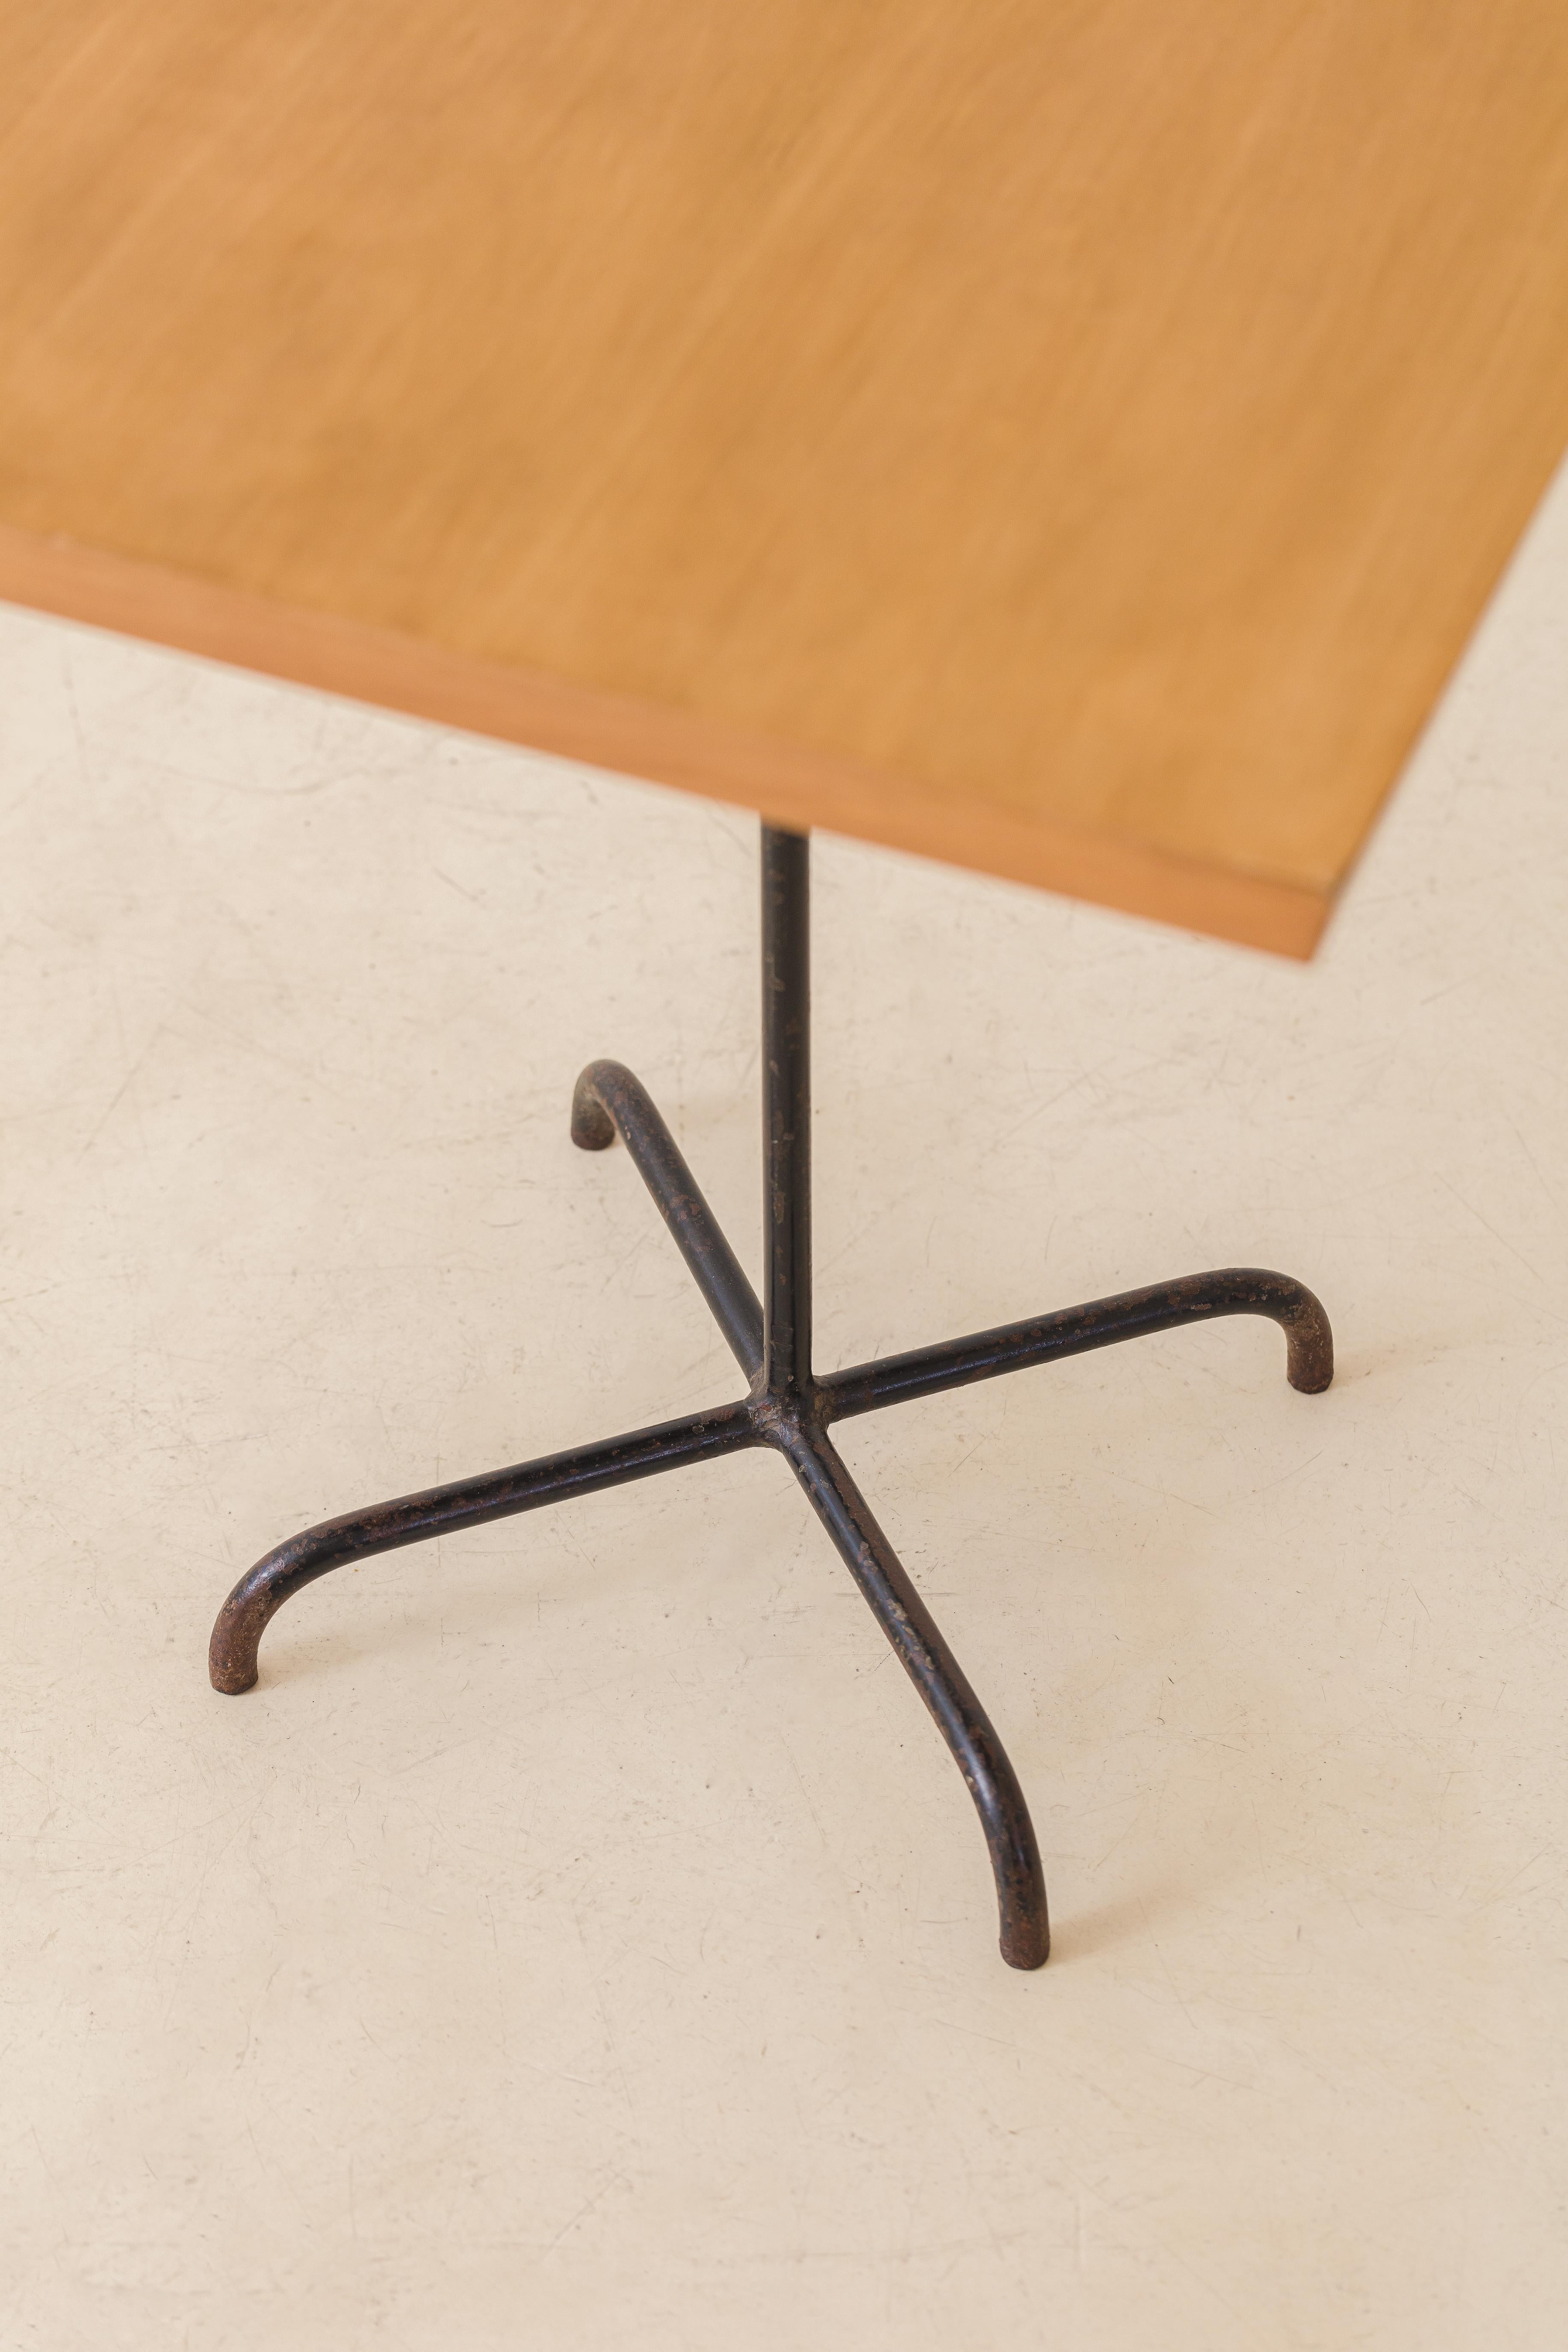 Painted Carlo Hauner and Martin Eisler Square Side Table, Midcentury, Brazil, C. 1950 